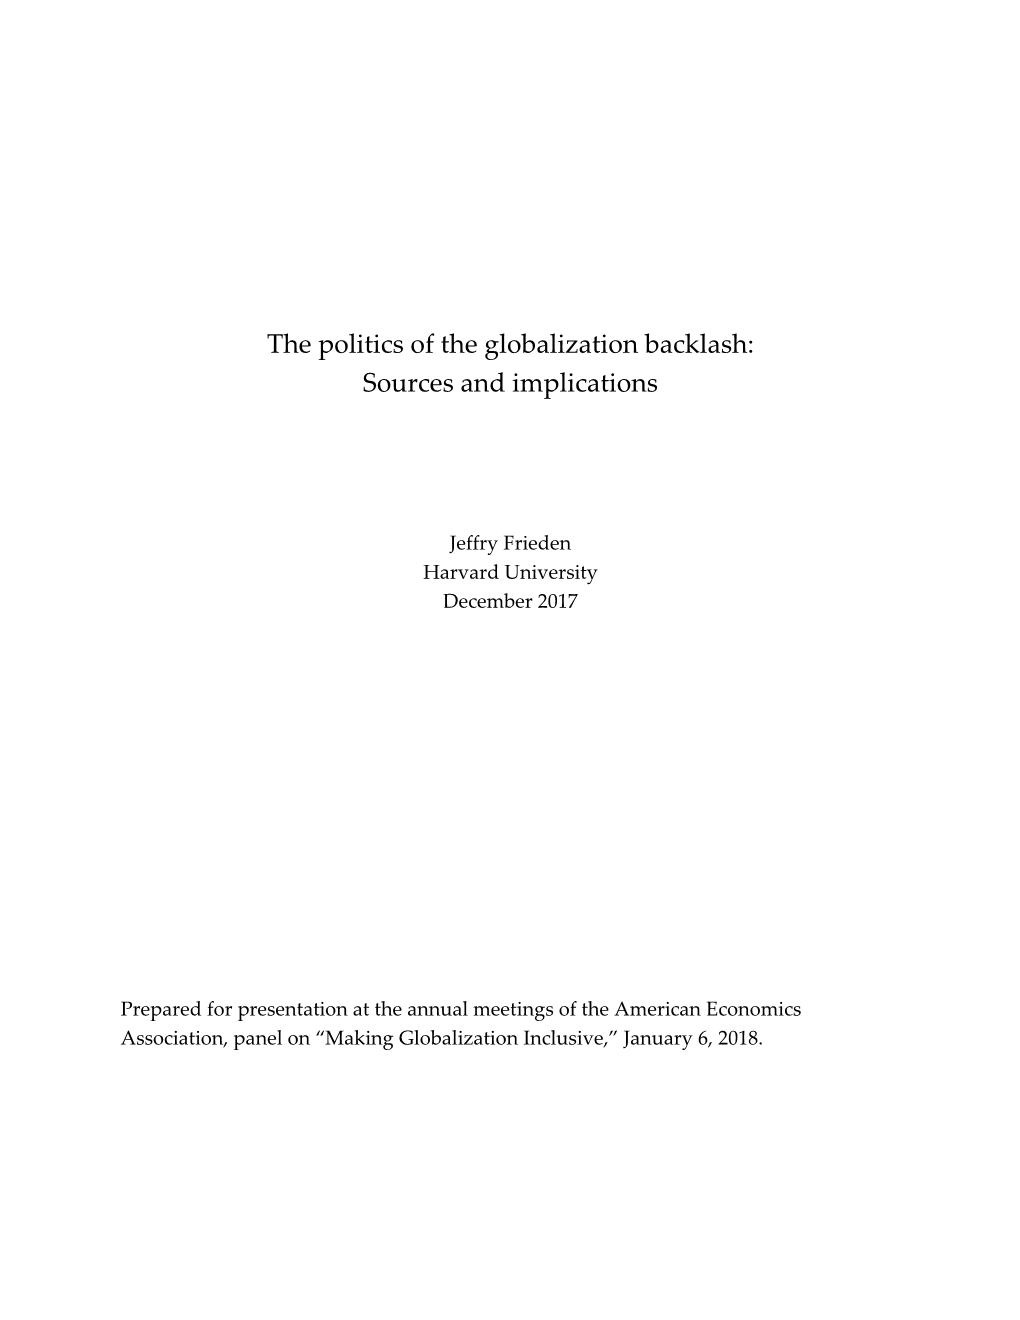 The Politics of the Globalization Backlash: Sources and Implications